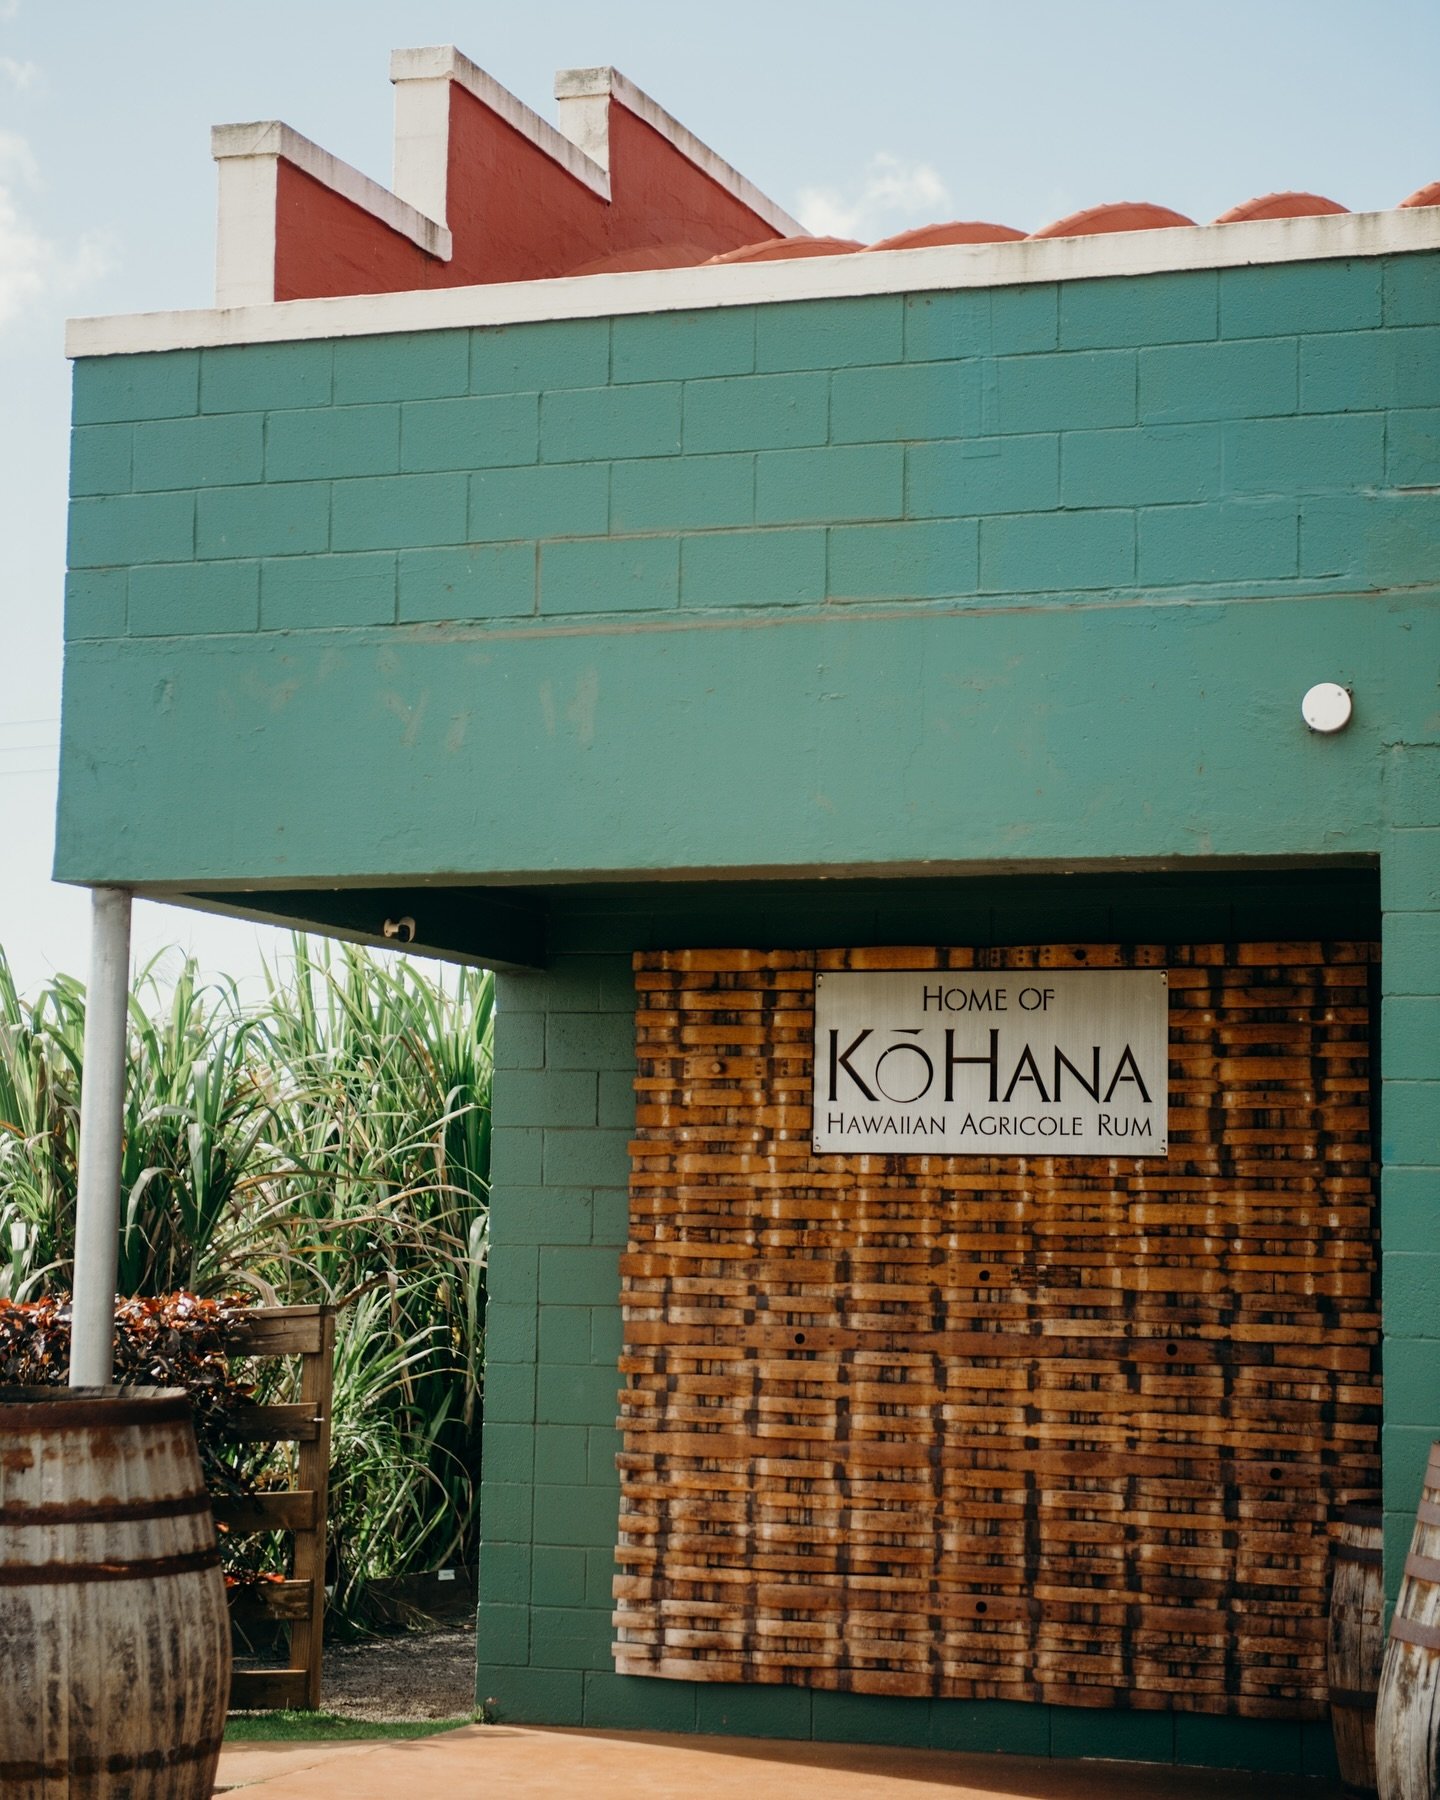 Curious to try something new and different this weekend?
Venture to Kunia, the agricultural heart of Oahu, and visit our distillery! 🥃 Join our guided tour of the sugarcane garden, barrel house and distillery before ending at the tasting bar with a 